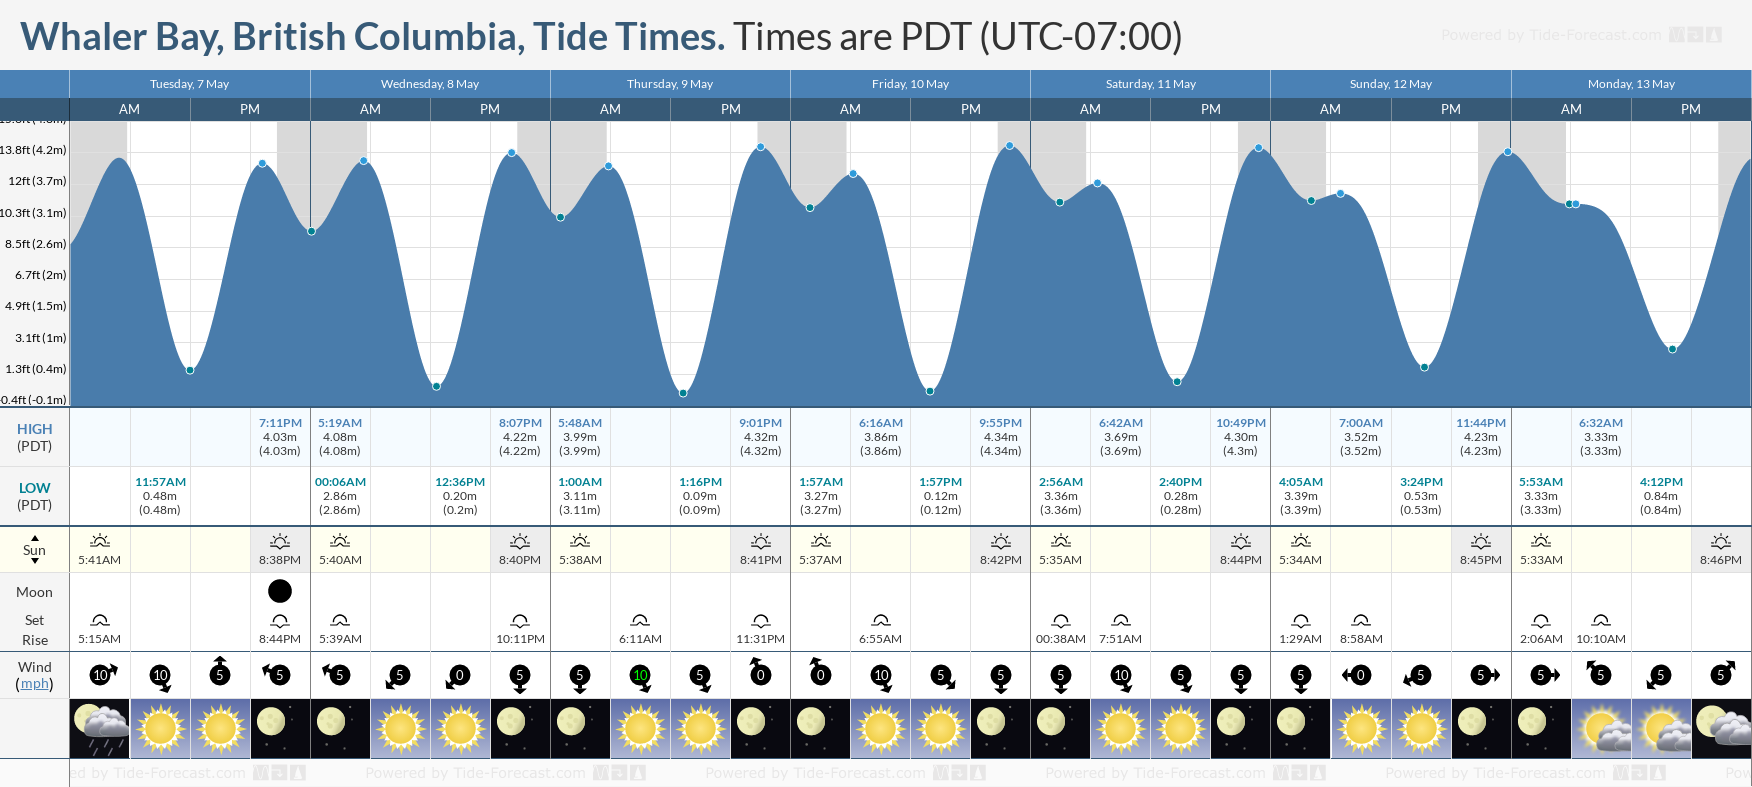 Whaler Bay, British Columbia Tide Chart including high and low tide tide times for the next 7 days